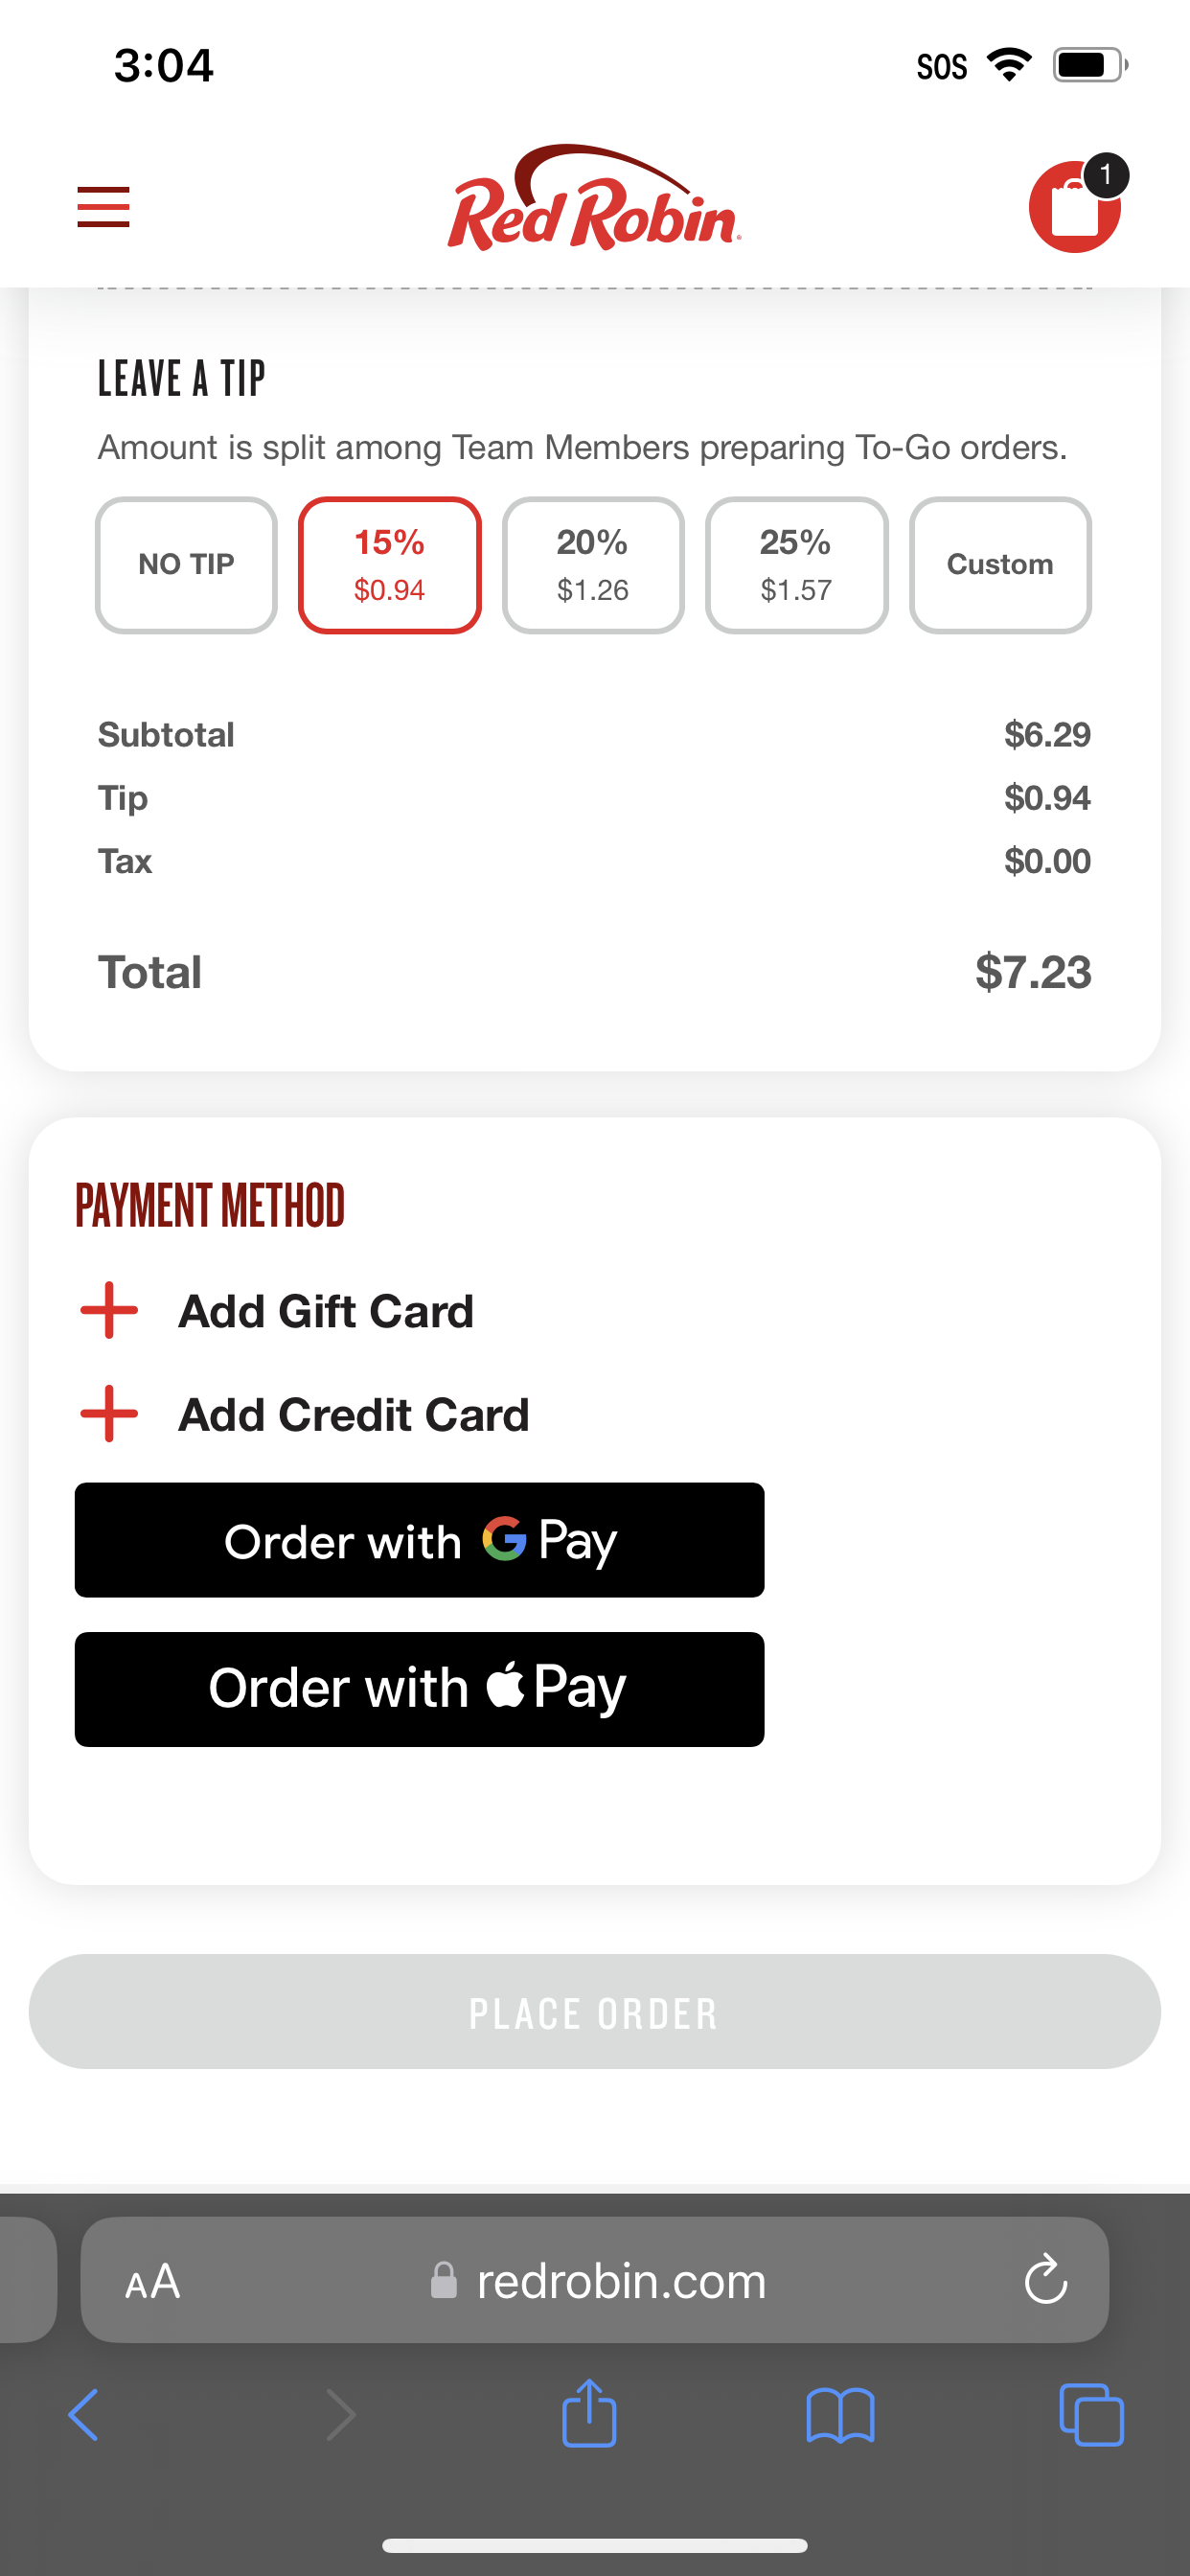 Red Robin accepts Google Pay & Apple Pay on its website.